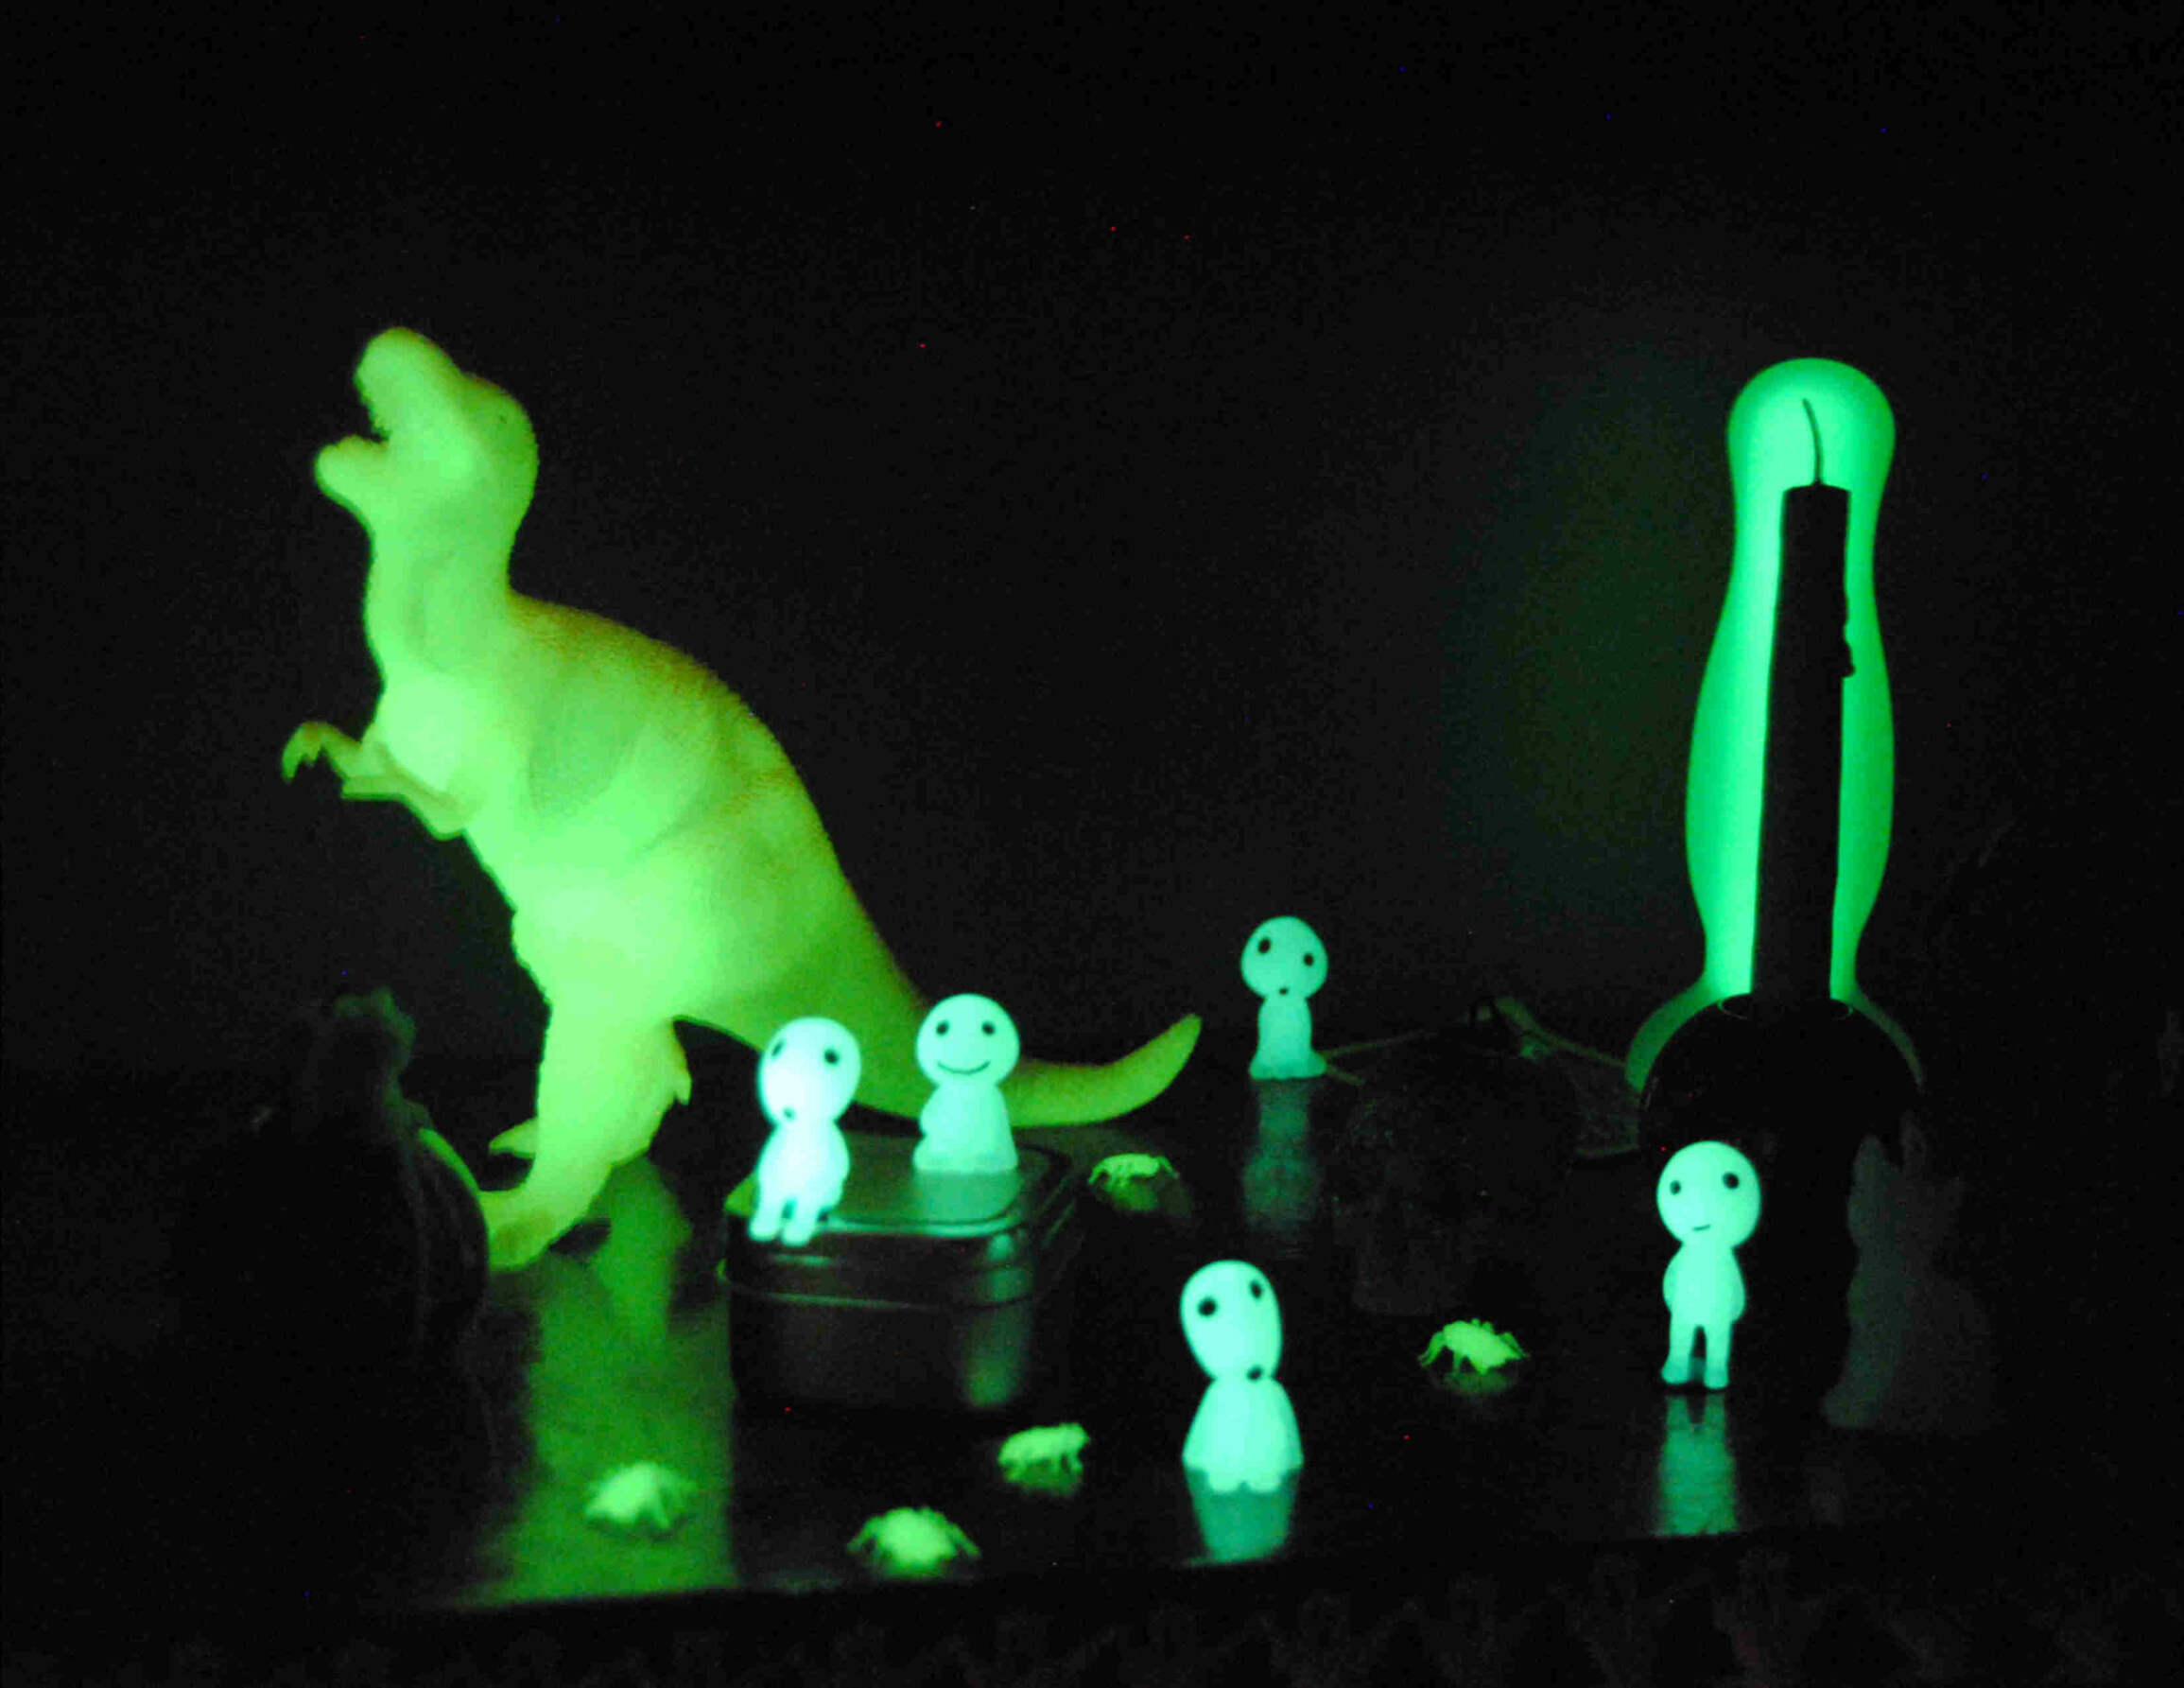 picture of a glow-in-the-dark toy dinosaur and other glow-in-the-dark-objects, in the dark